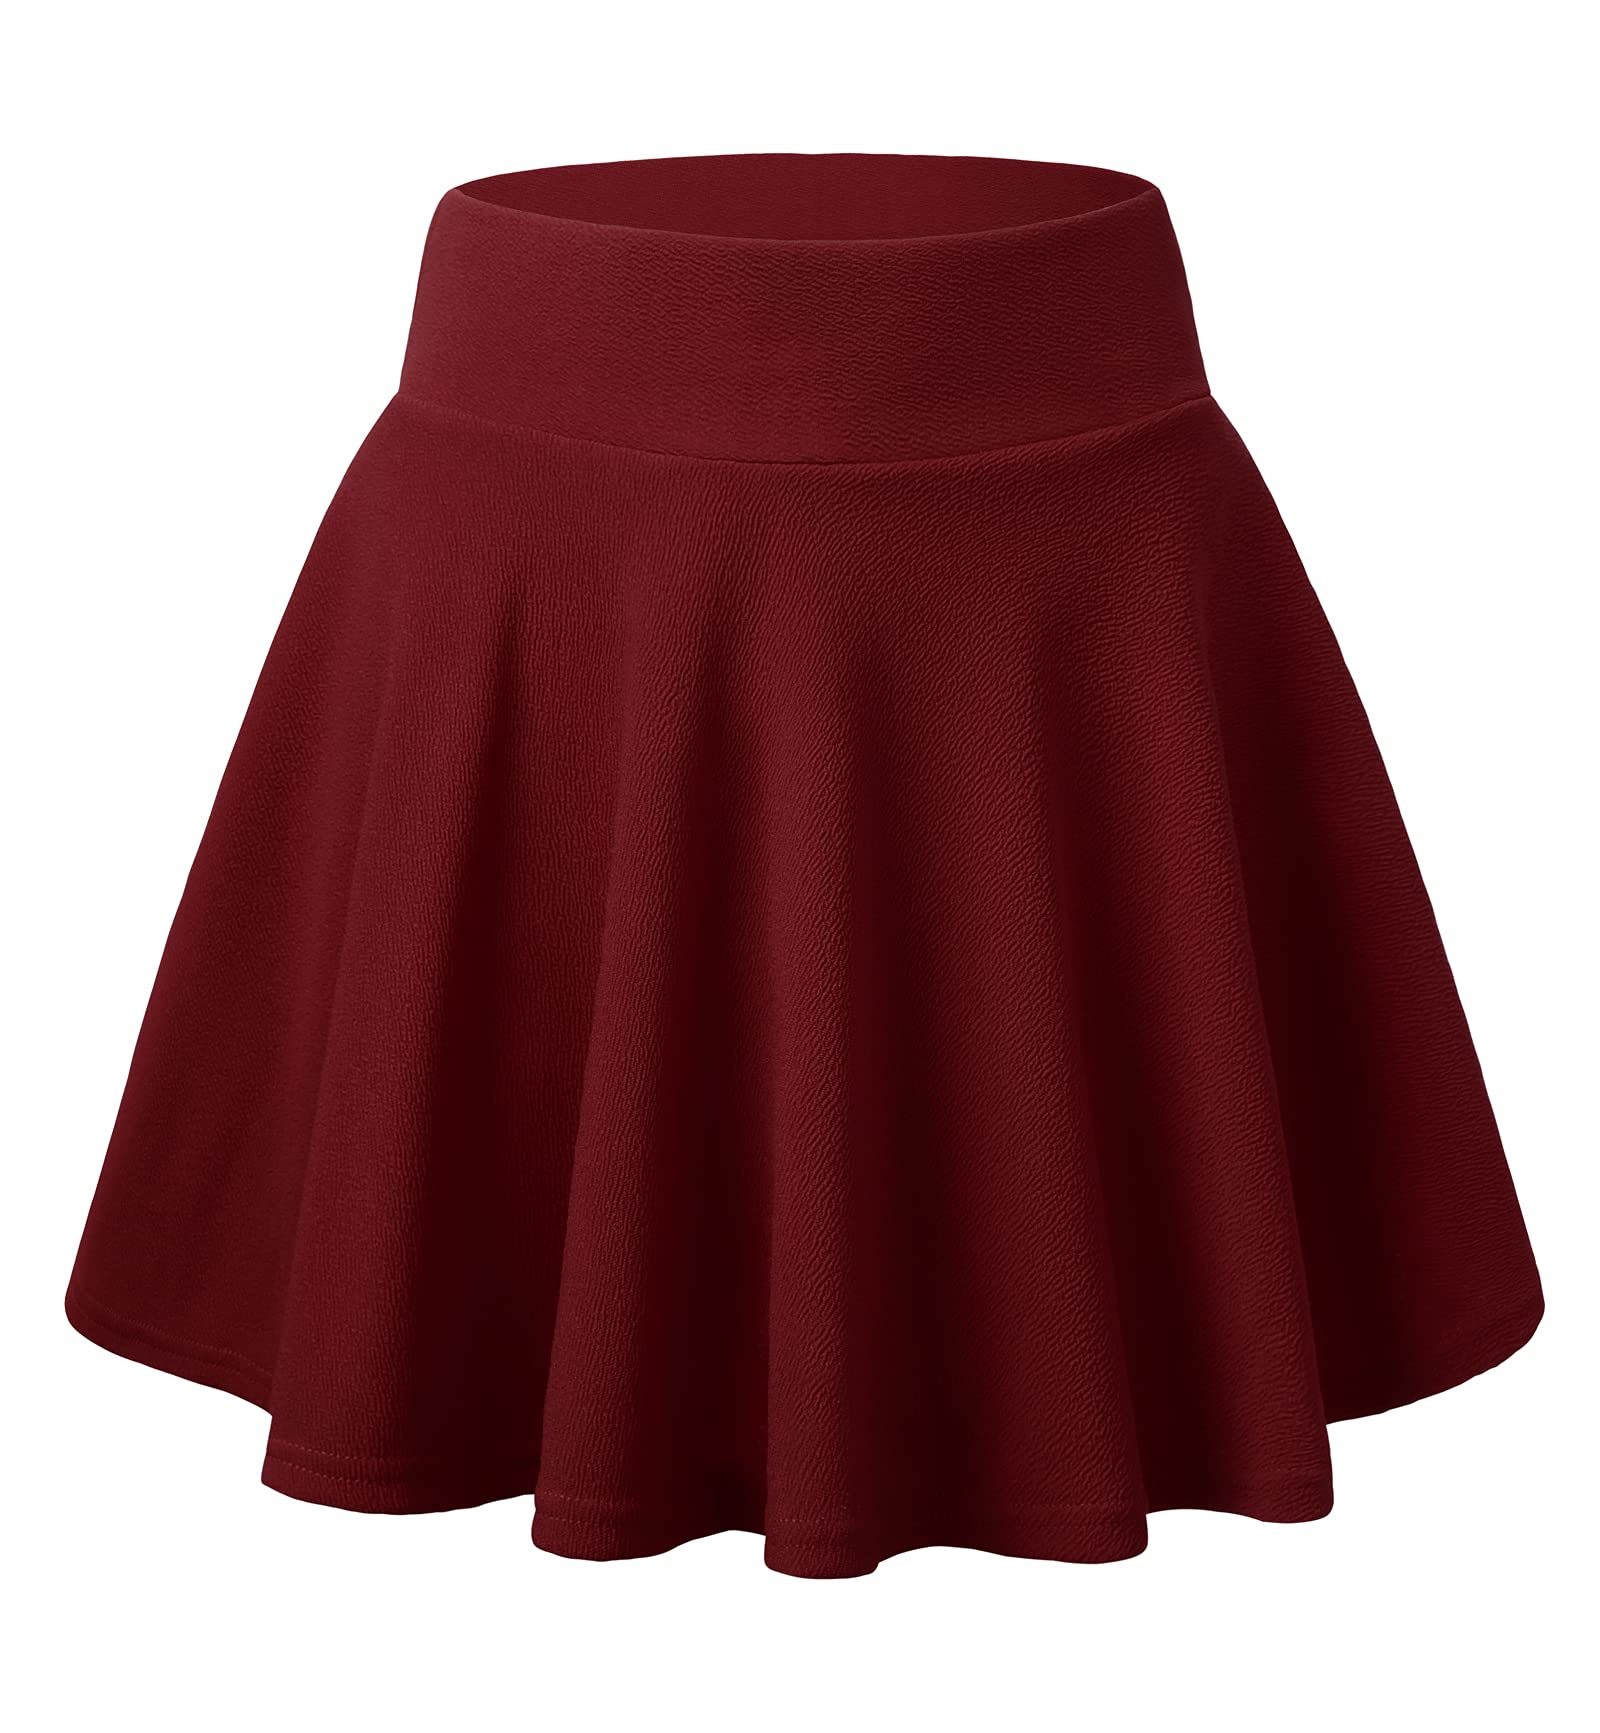 DJT Flared Pleated Wine Women's Casual Stretchy Mini Skater Skirt with Shorts